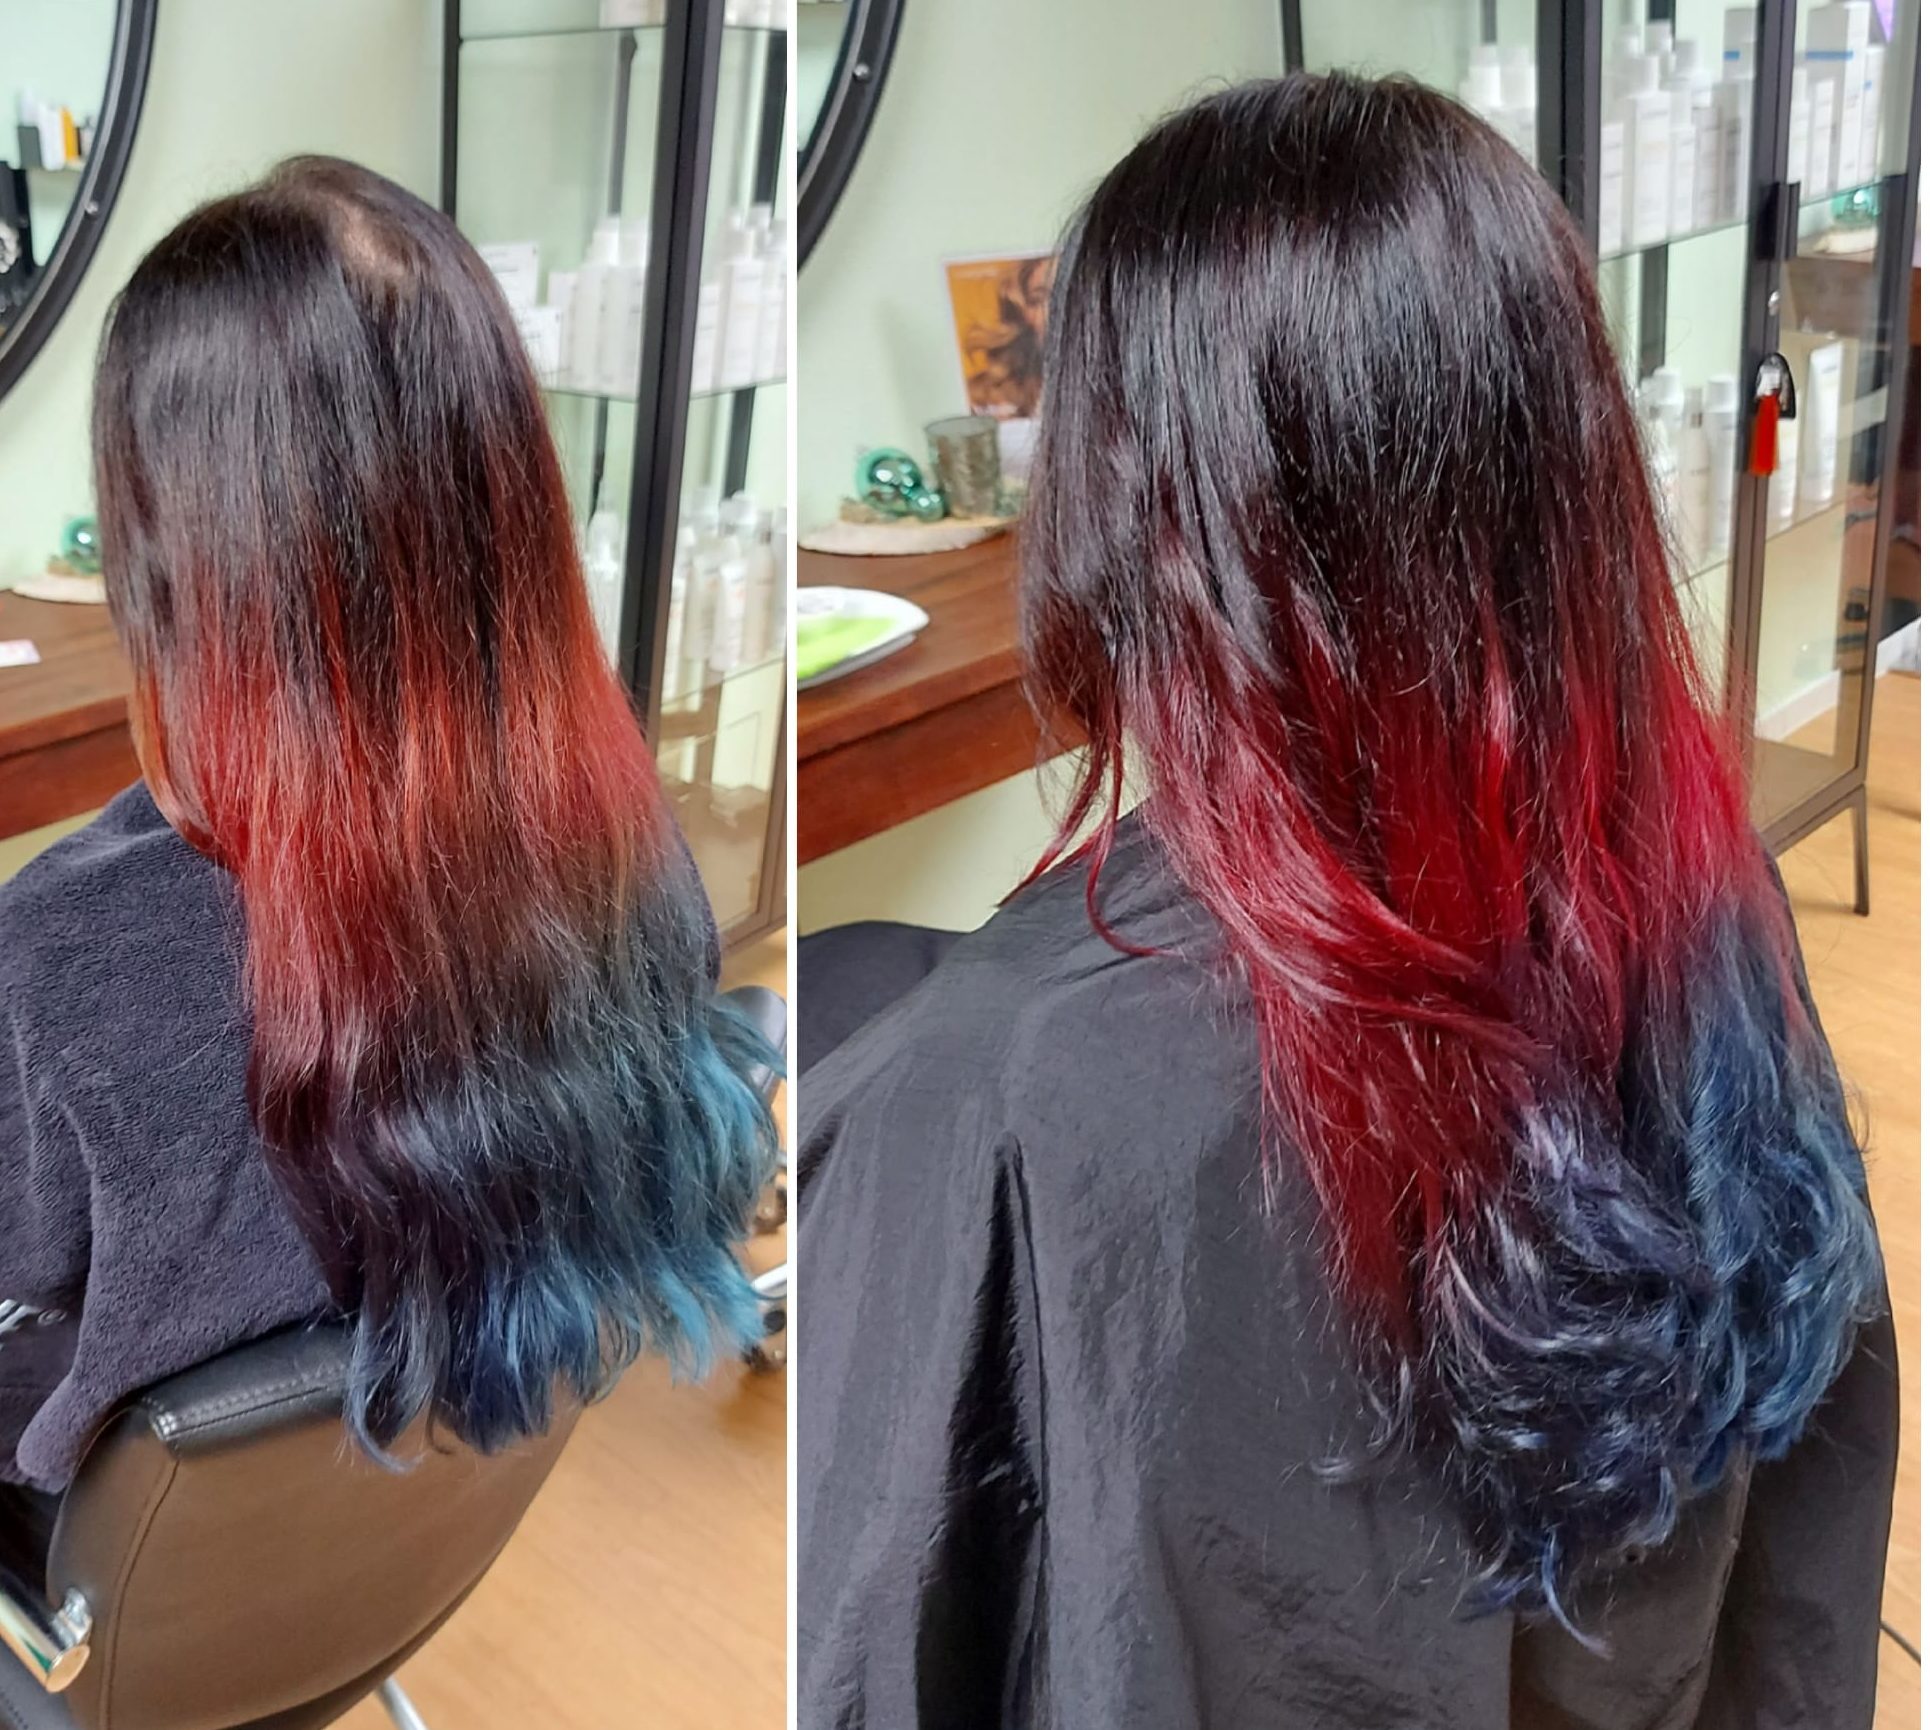 From Dark to red & blue